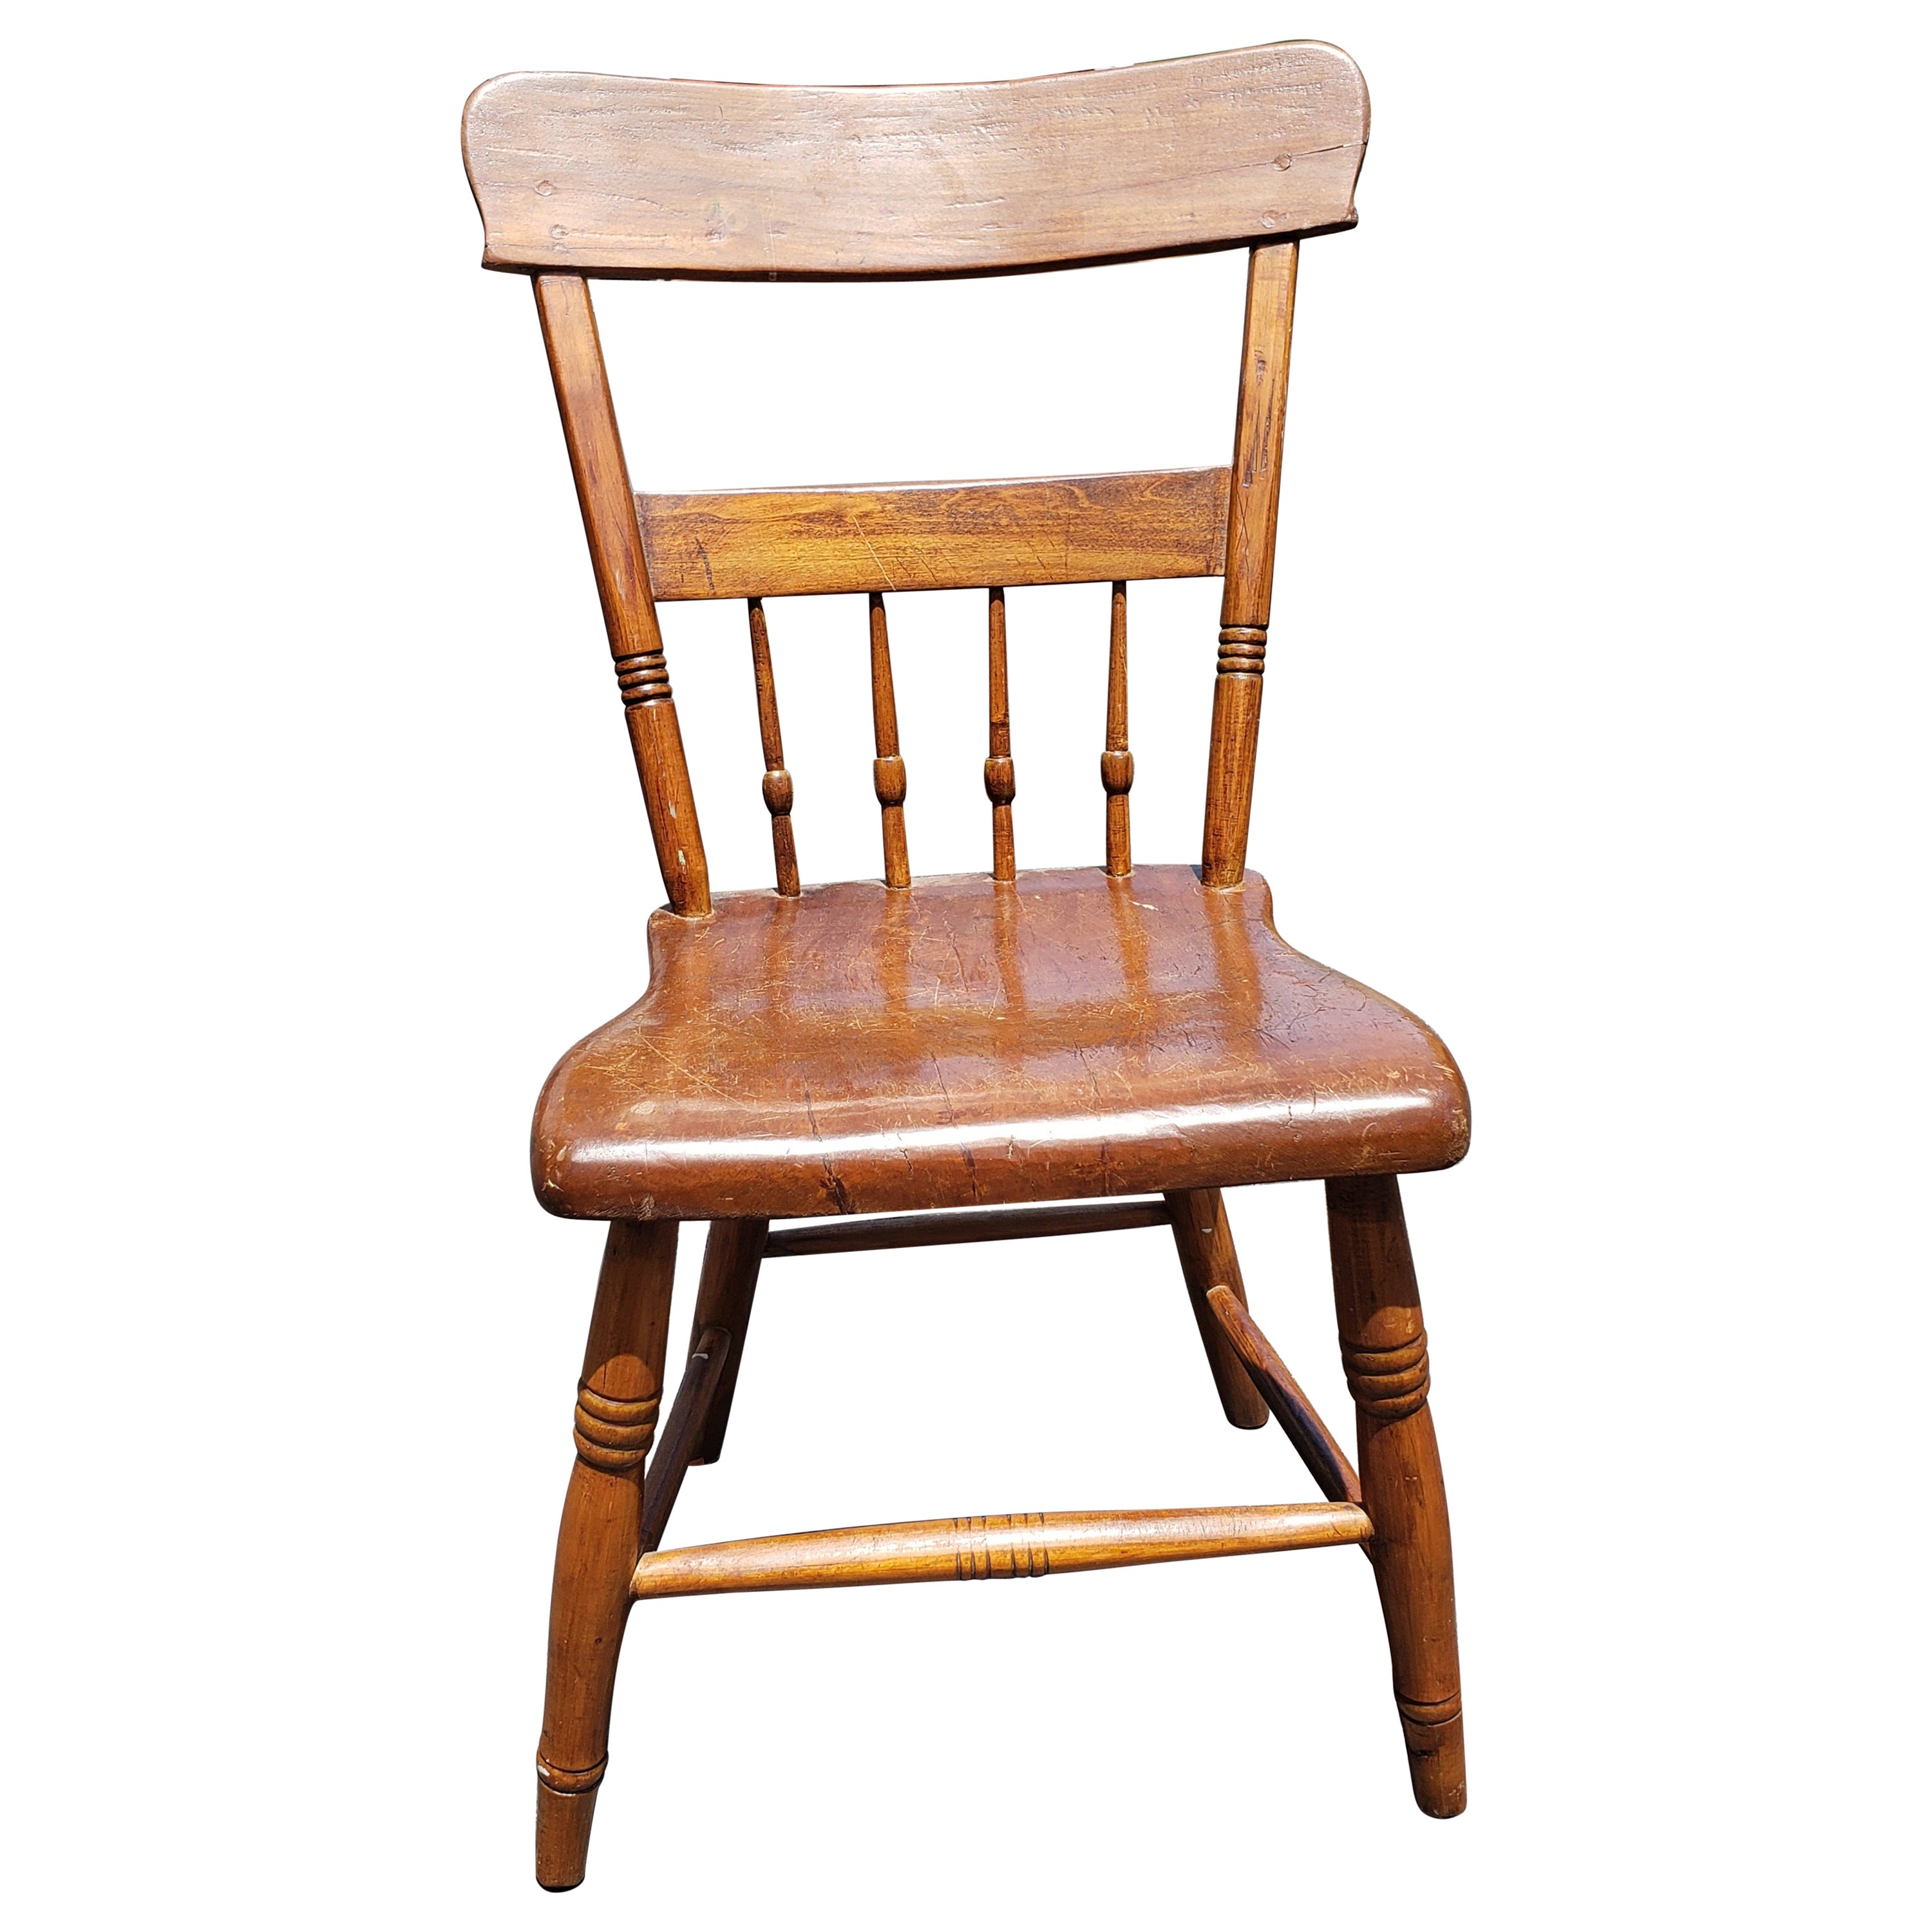 Late 19th Century Early American  HandCrafted Maple Plank Chair For Sale